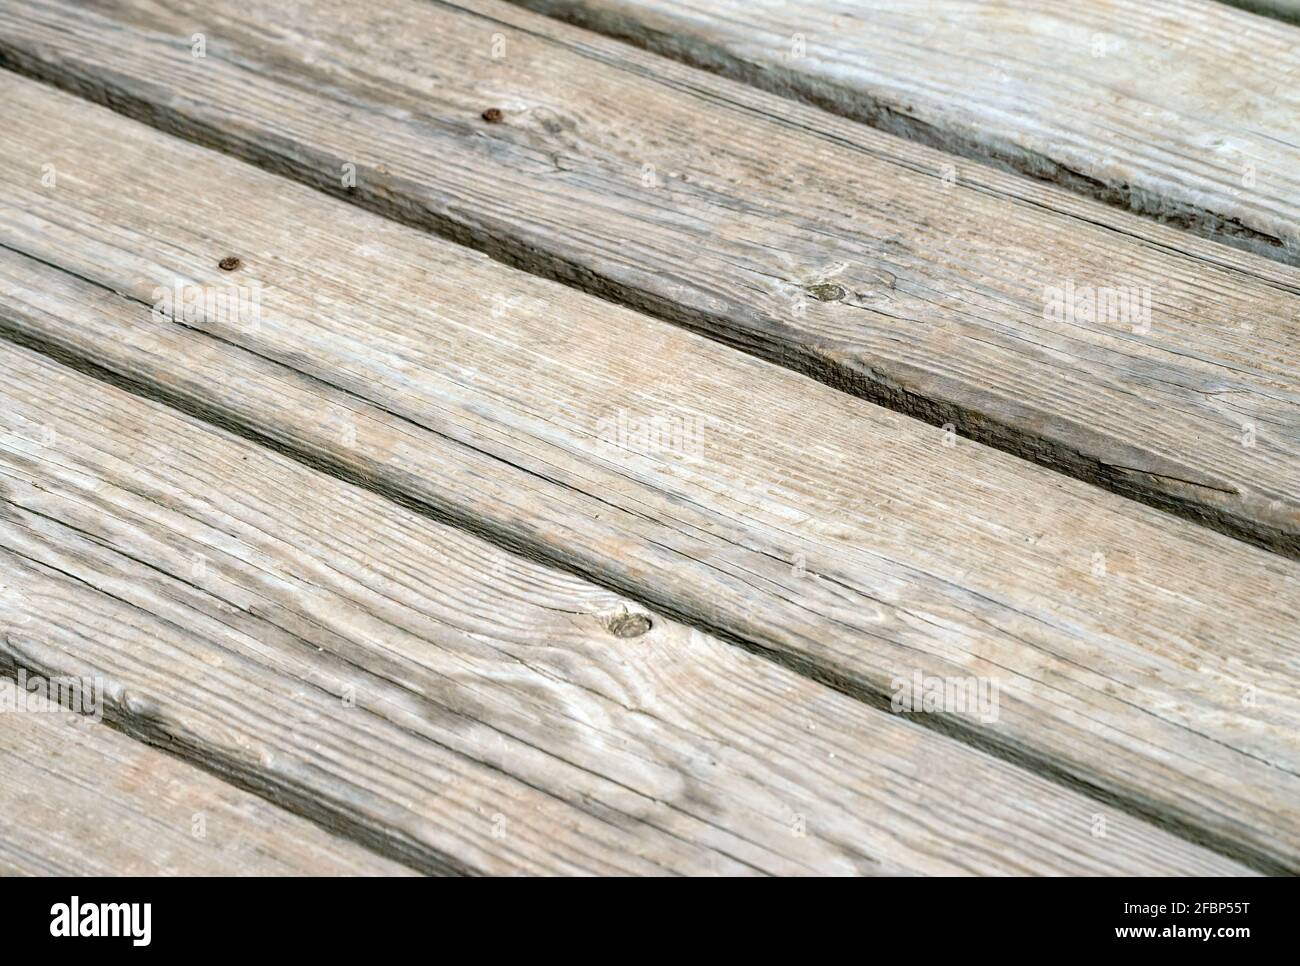 The backyard deck is beginning to look old and weathered and could use a good coat of sealer. It makes a nice texture or background with a slight boke Stock Photo